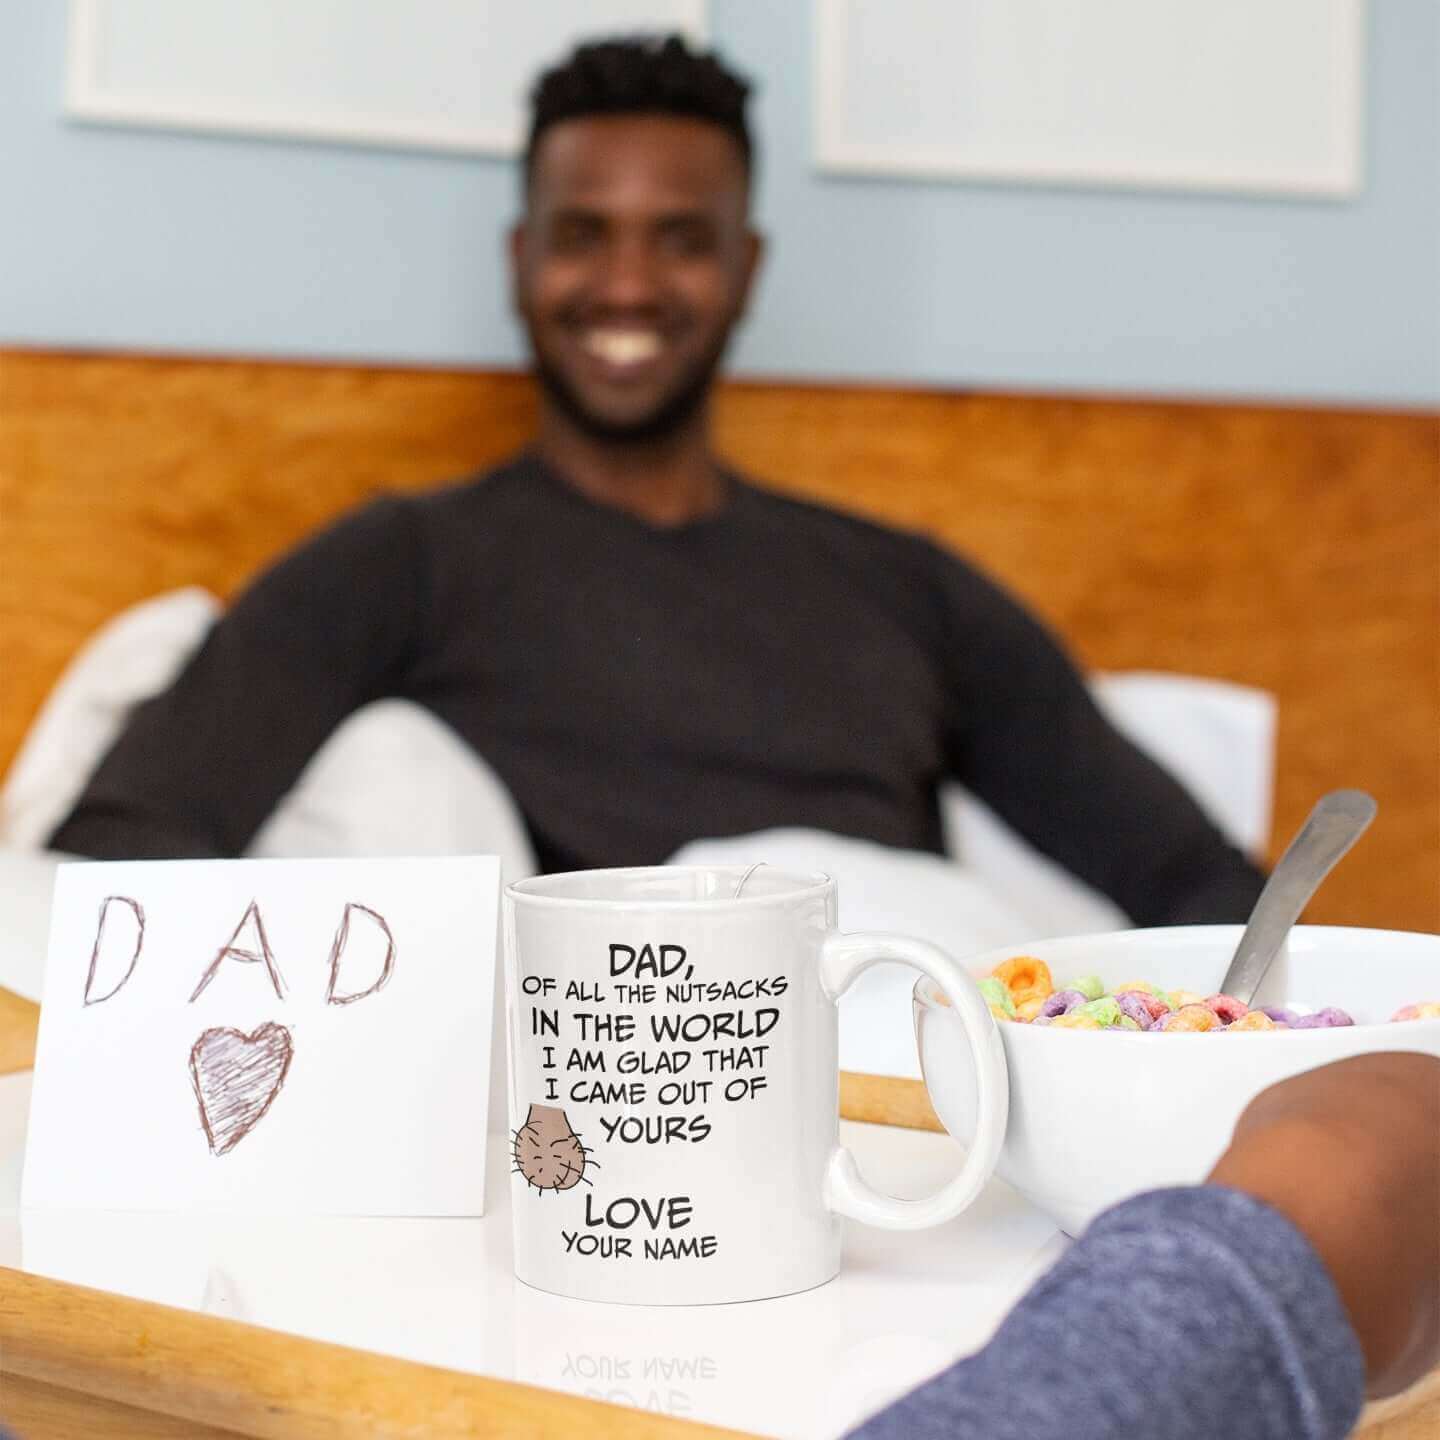 Dad, of all the nutsacks in the world, I am glad that I came out of yours - White glossy mug - Horrible Designs